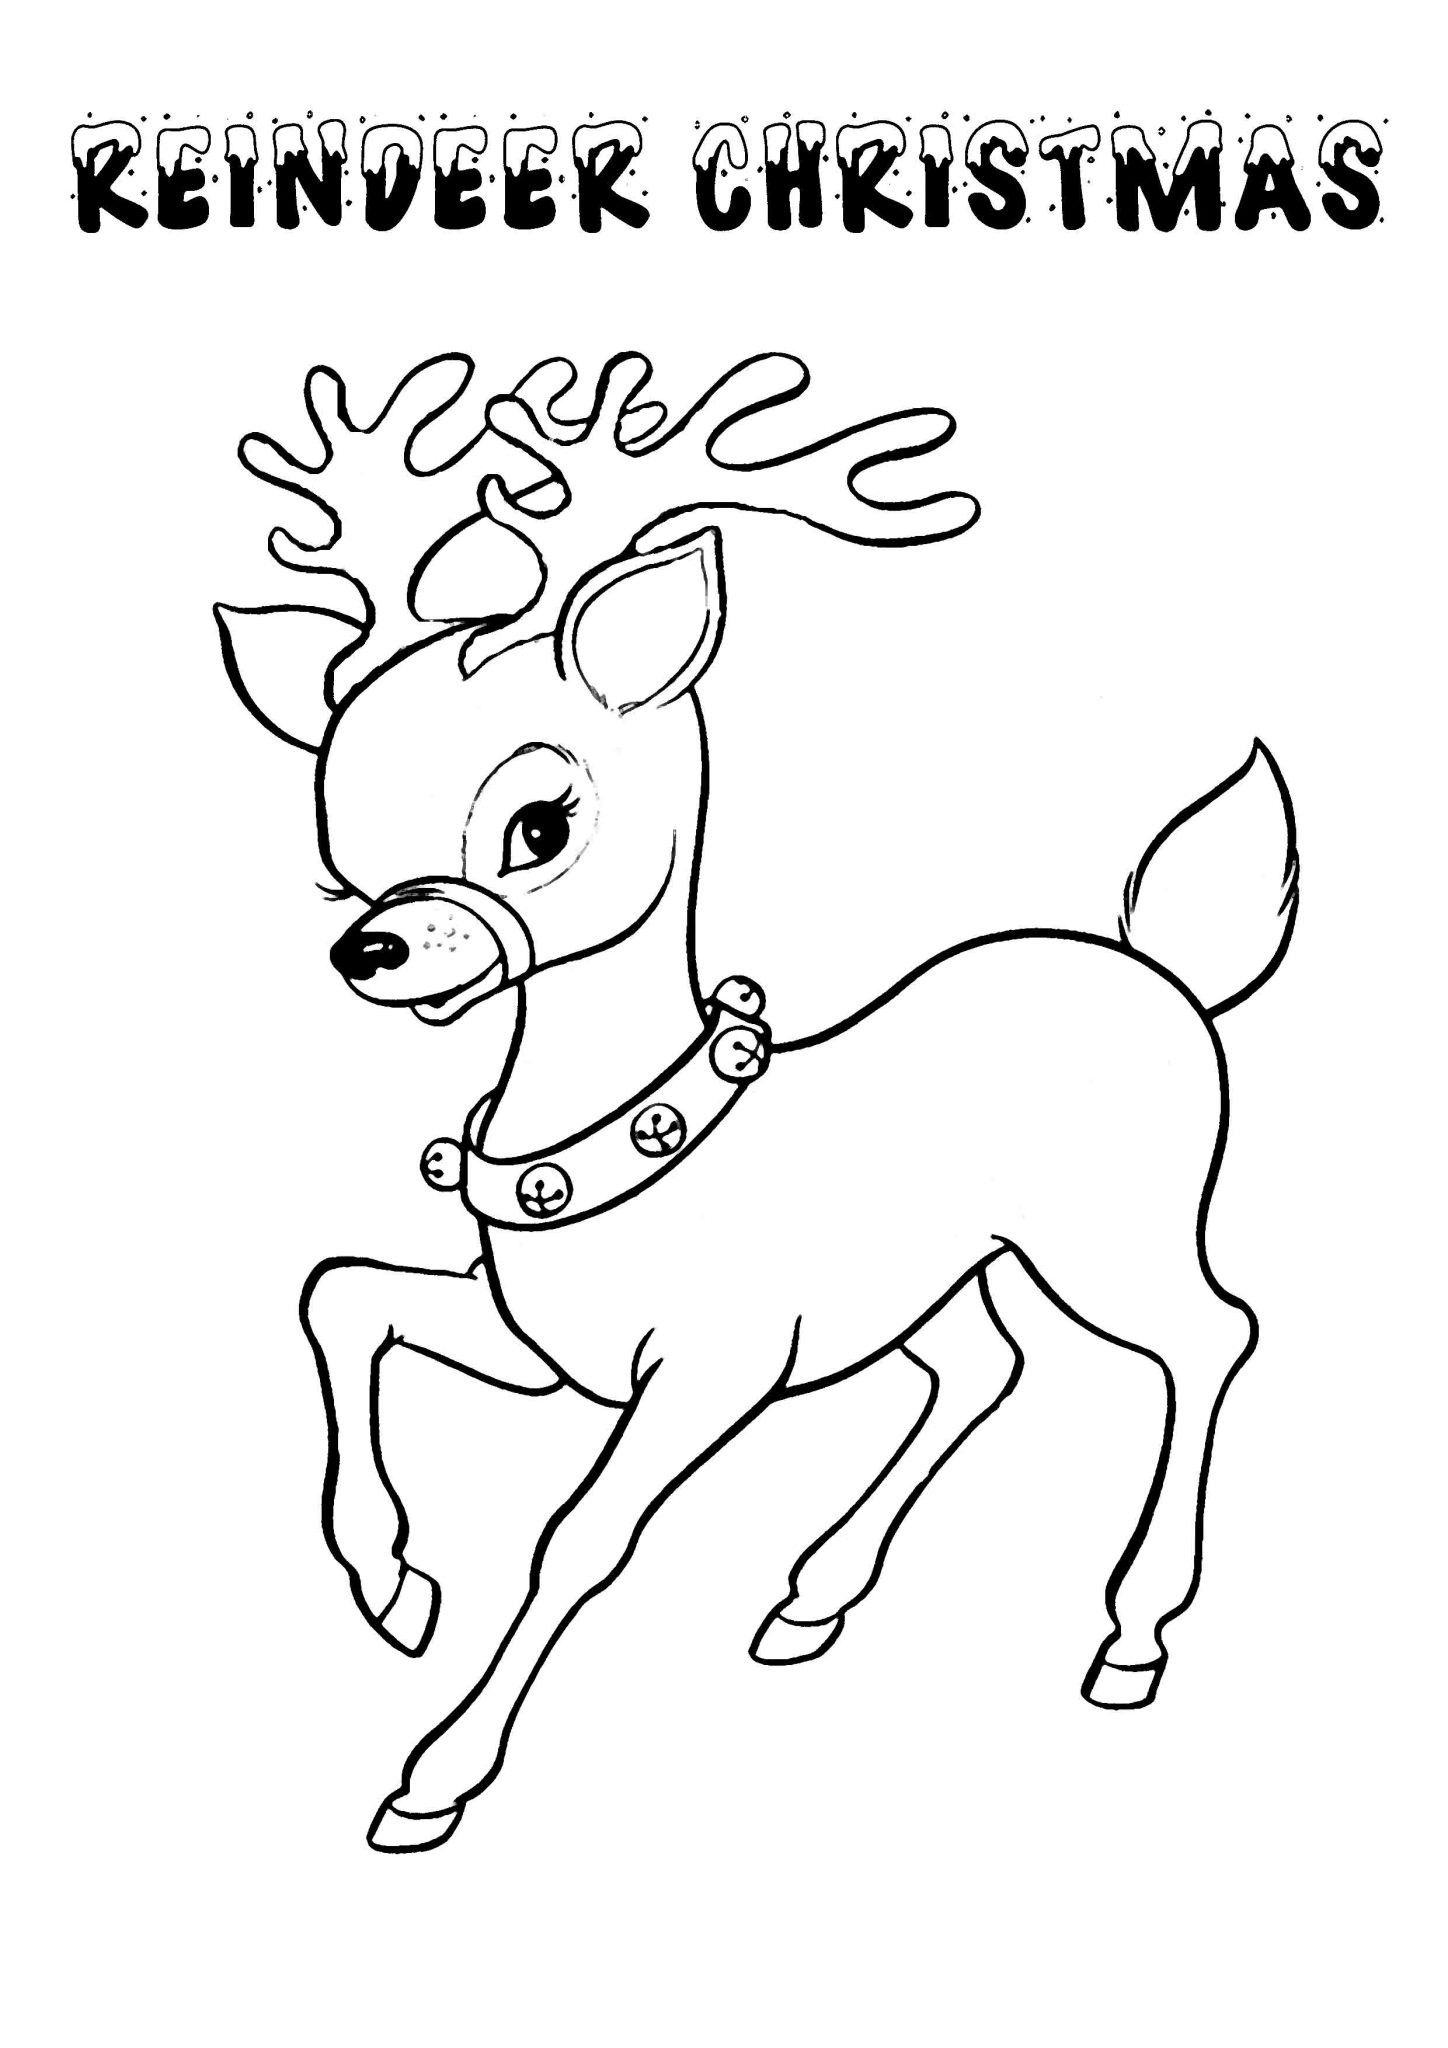 Kids Christmas Coloring Book
 Printable Christmas Coloring Pages for Kids – Best Apps